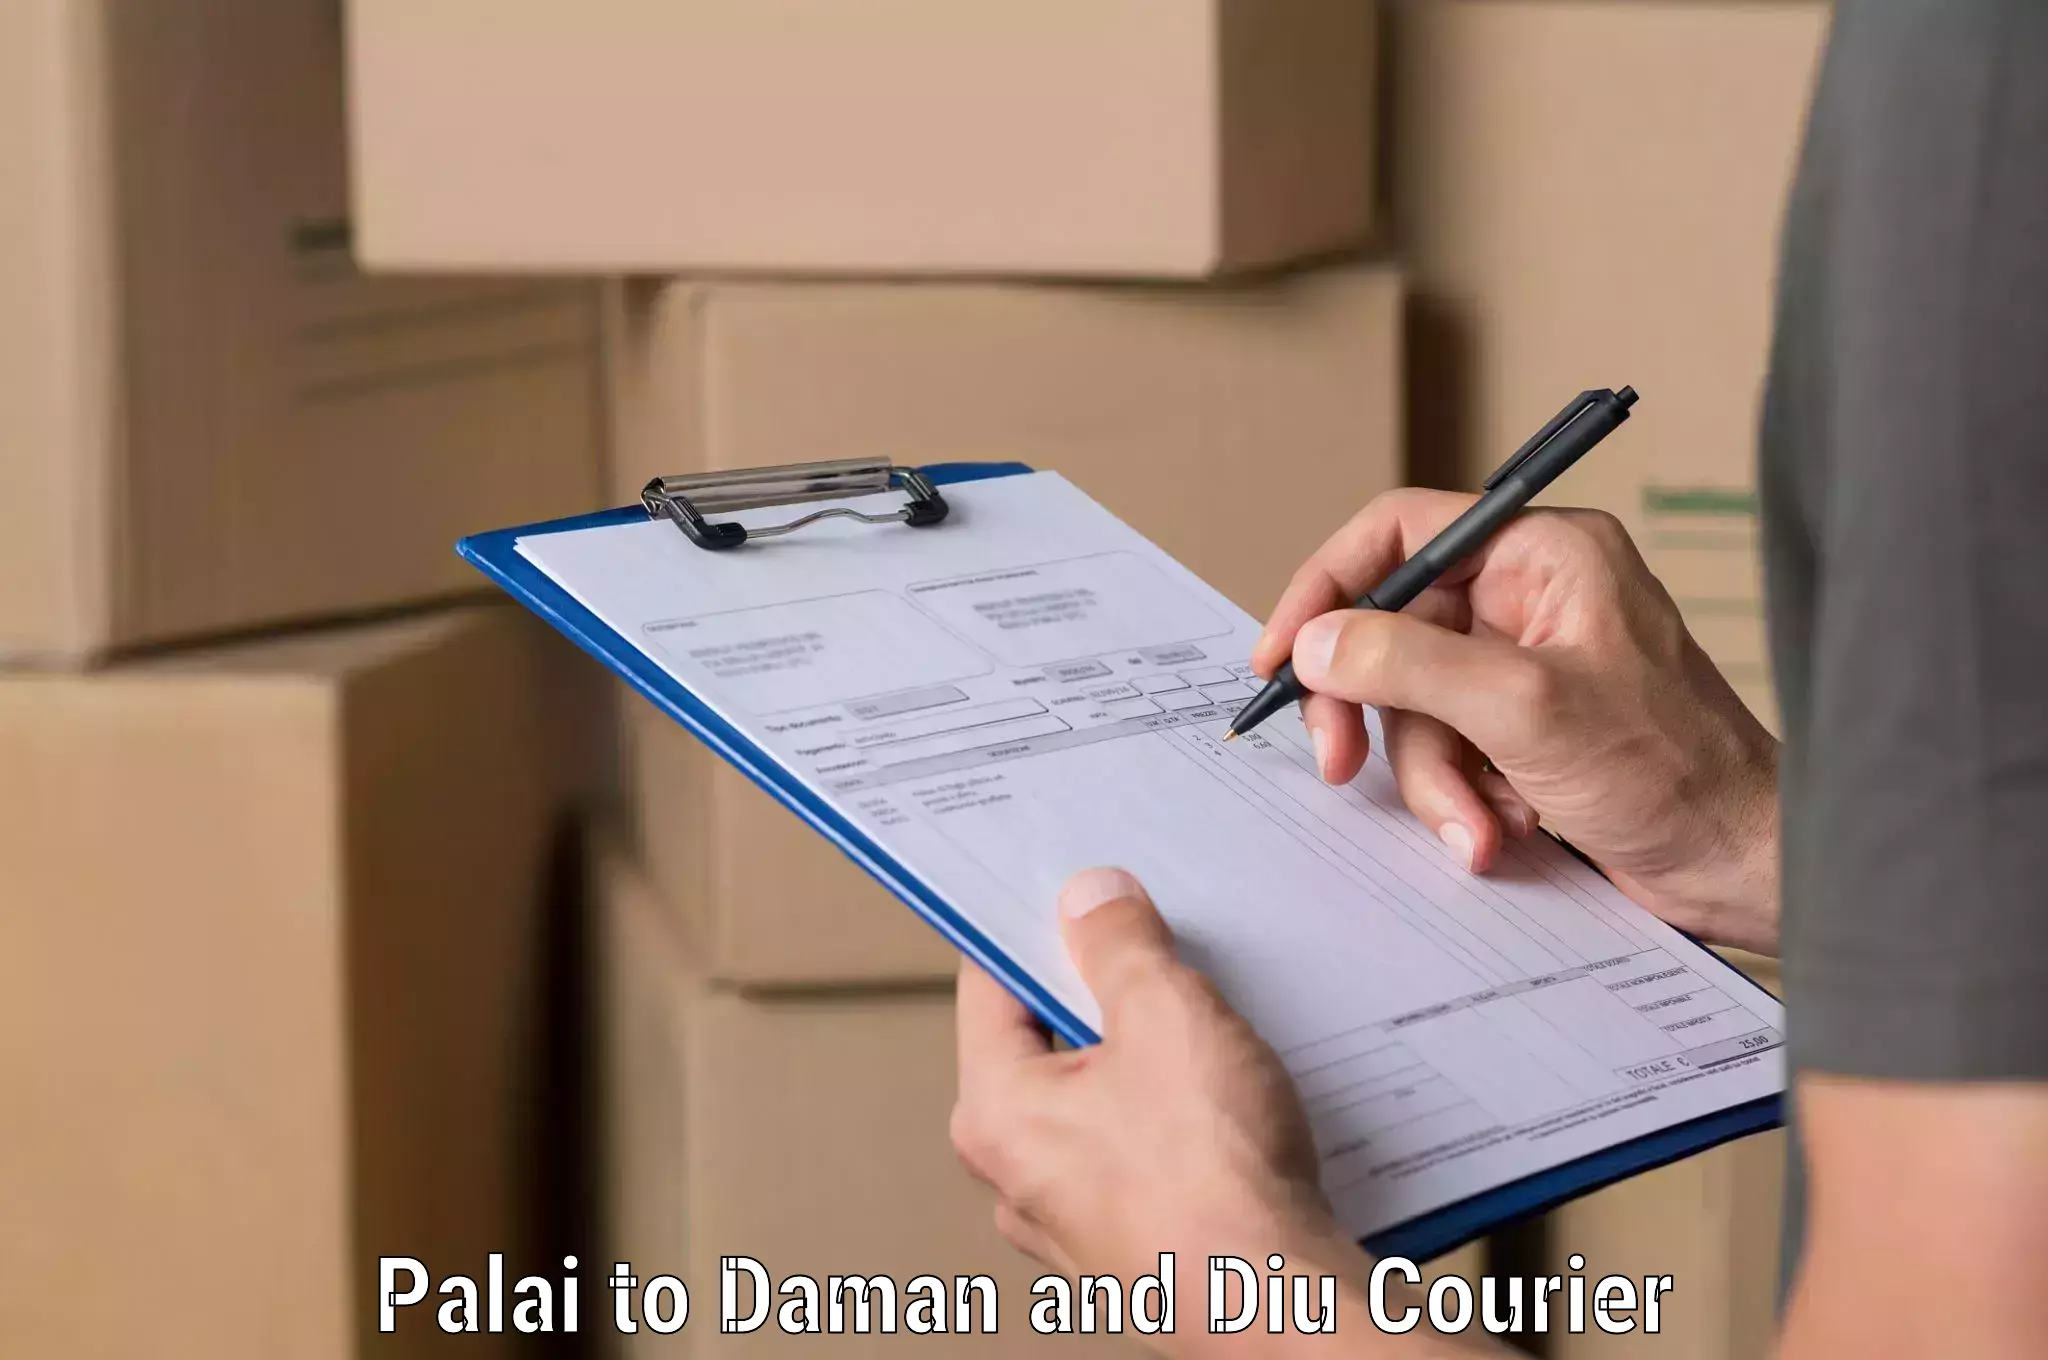 Sustainable delivery practices Palai to Daman and Diu